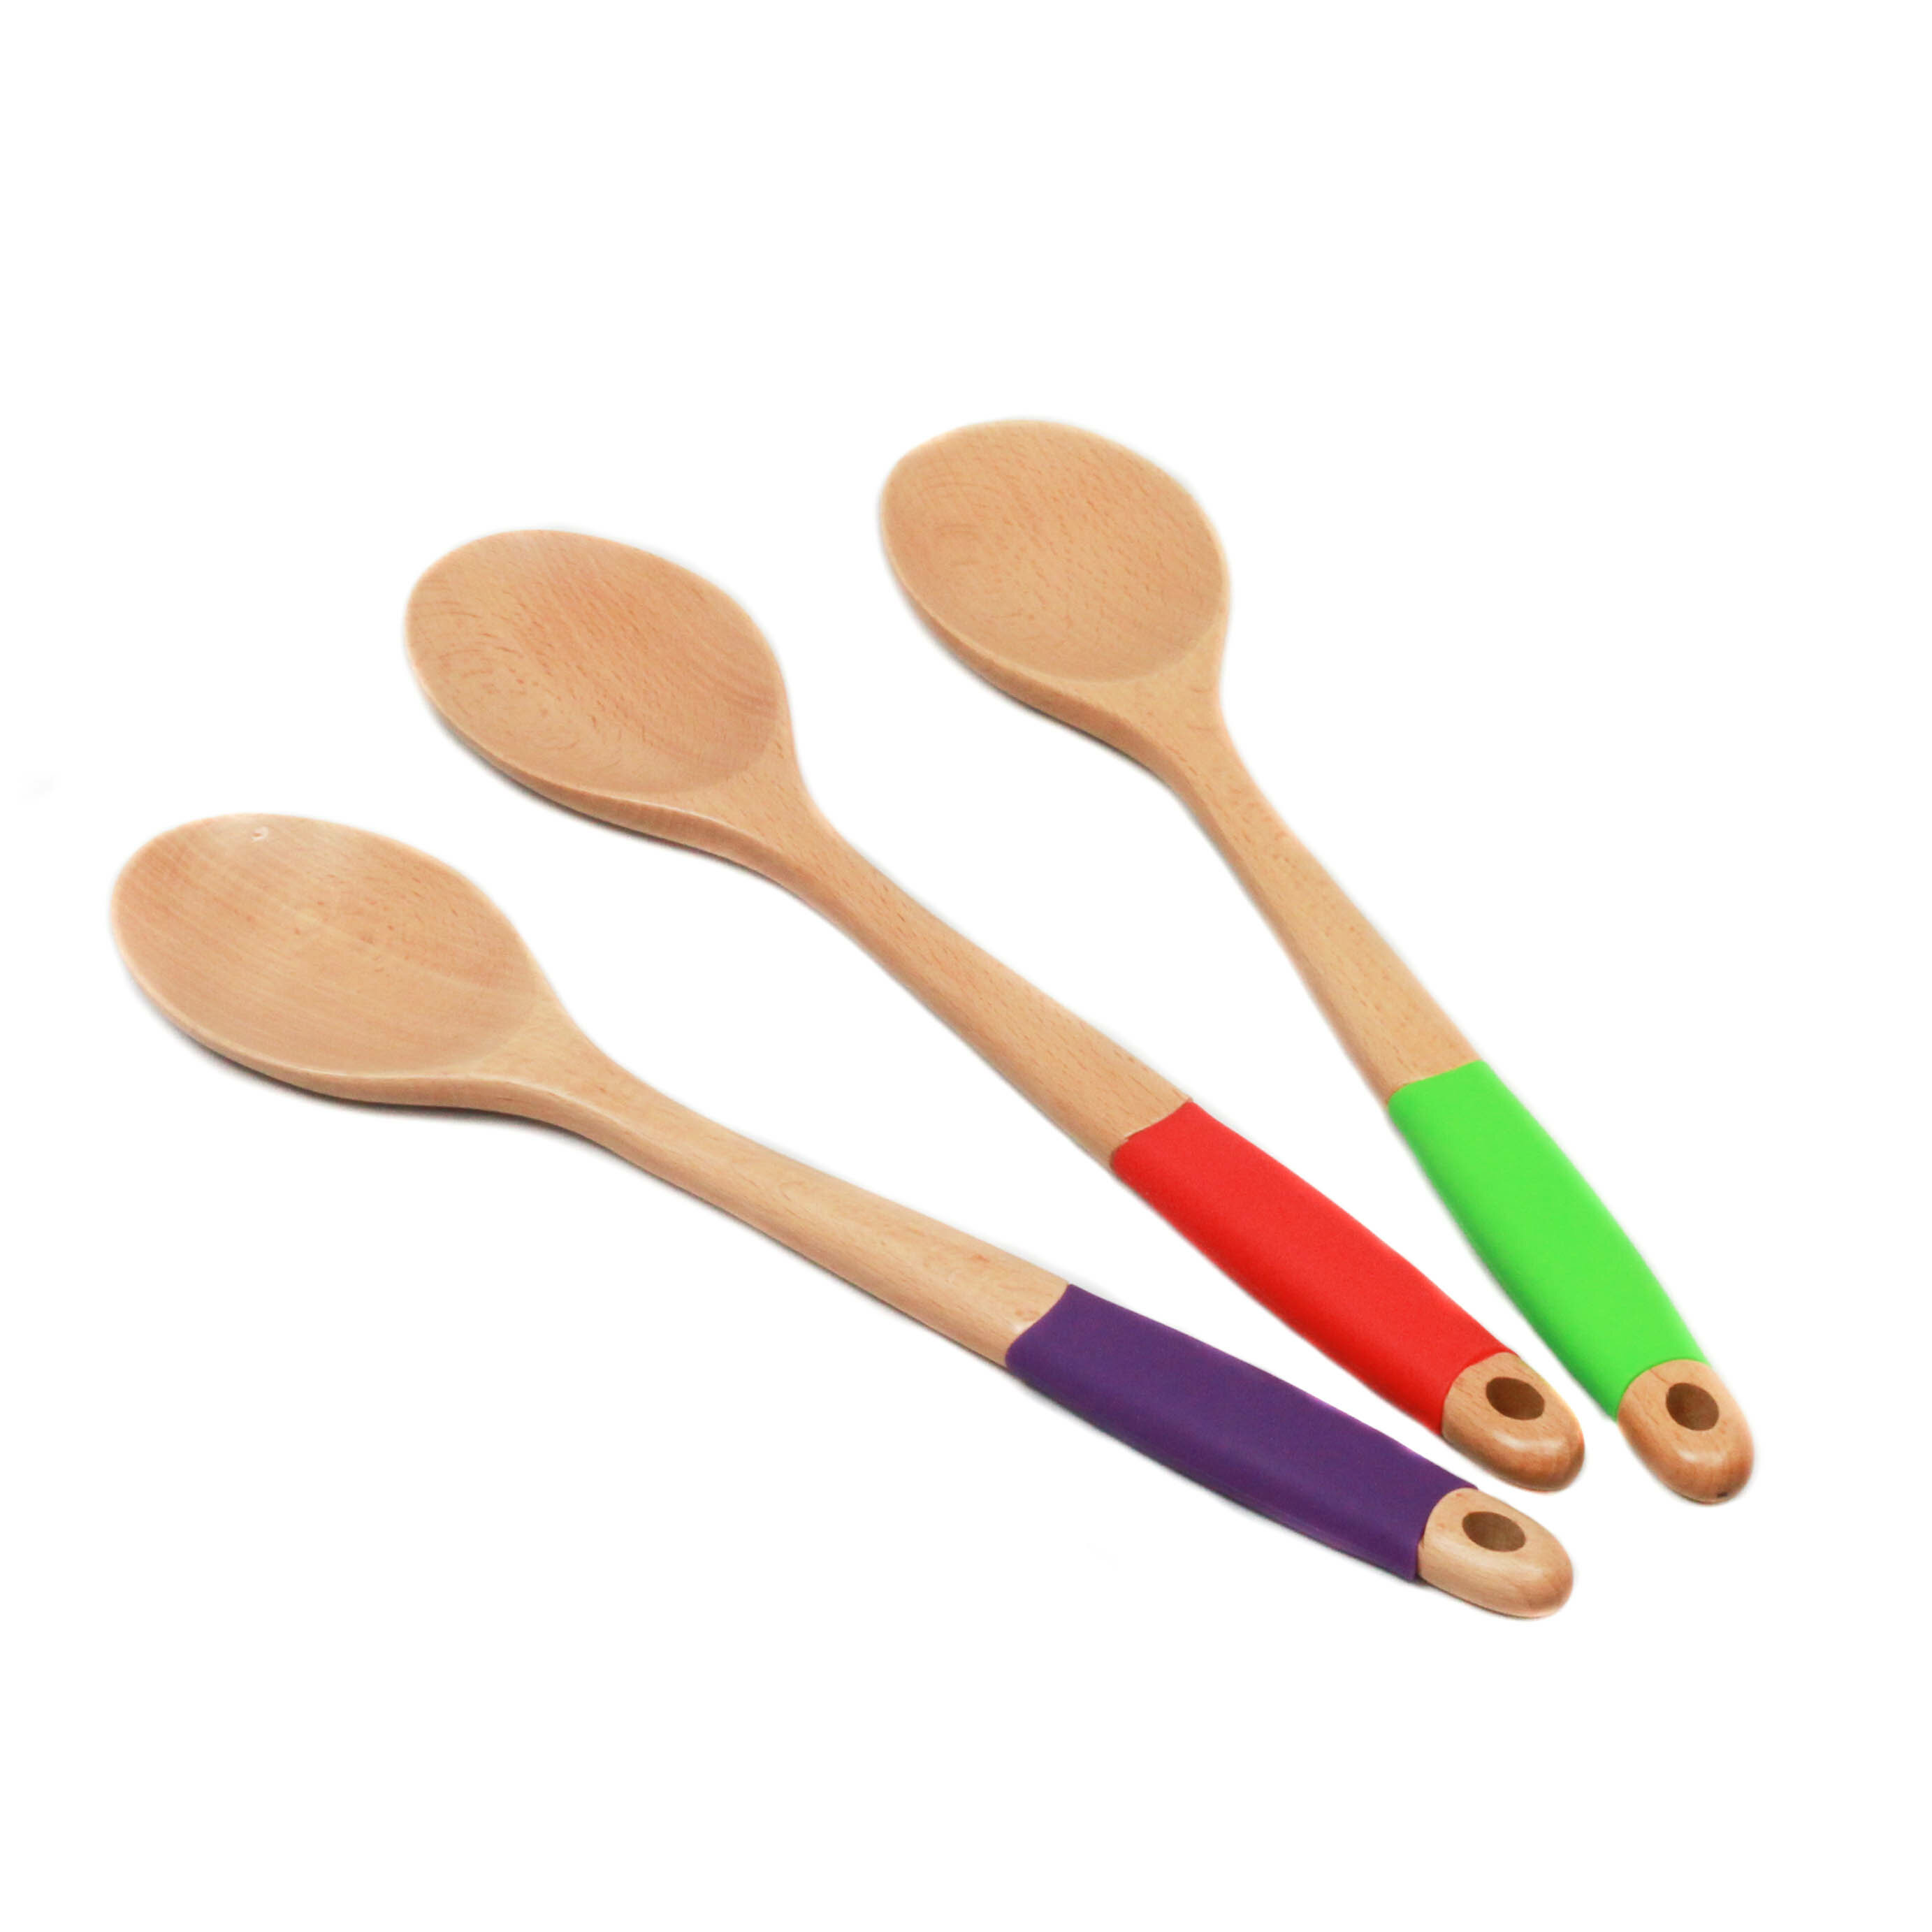 New OXO Set of 3 Beech Wood Wooden Spoon Cooking and Serving Set